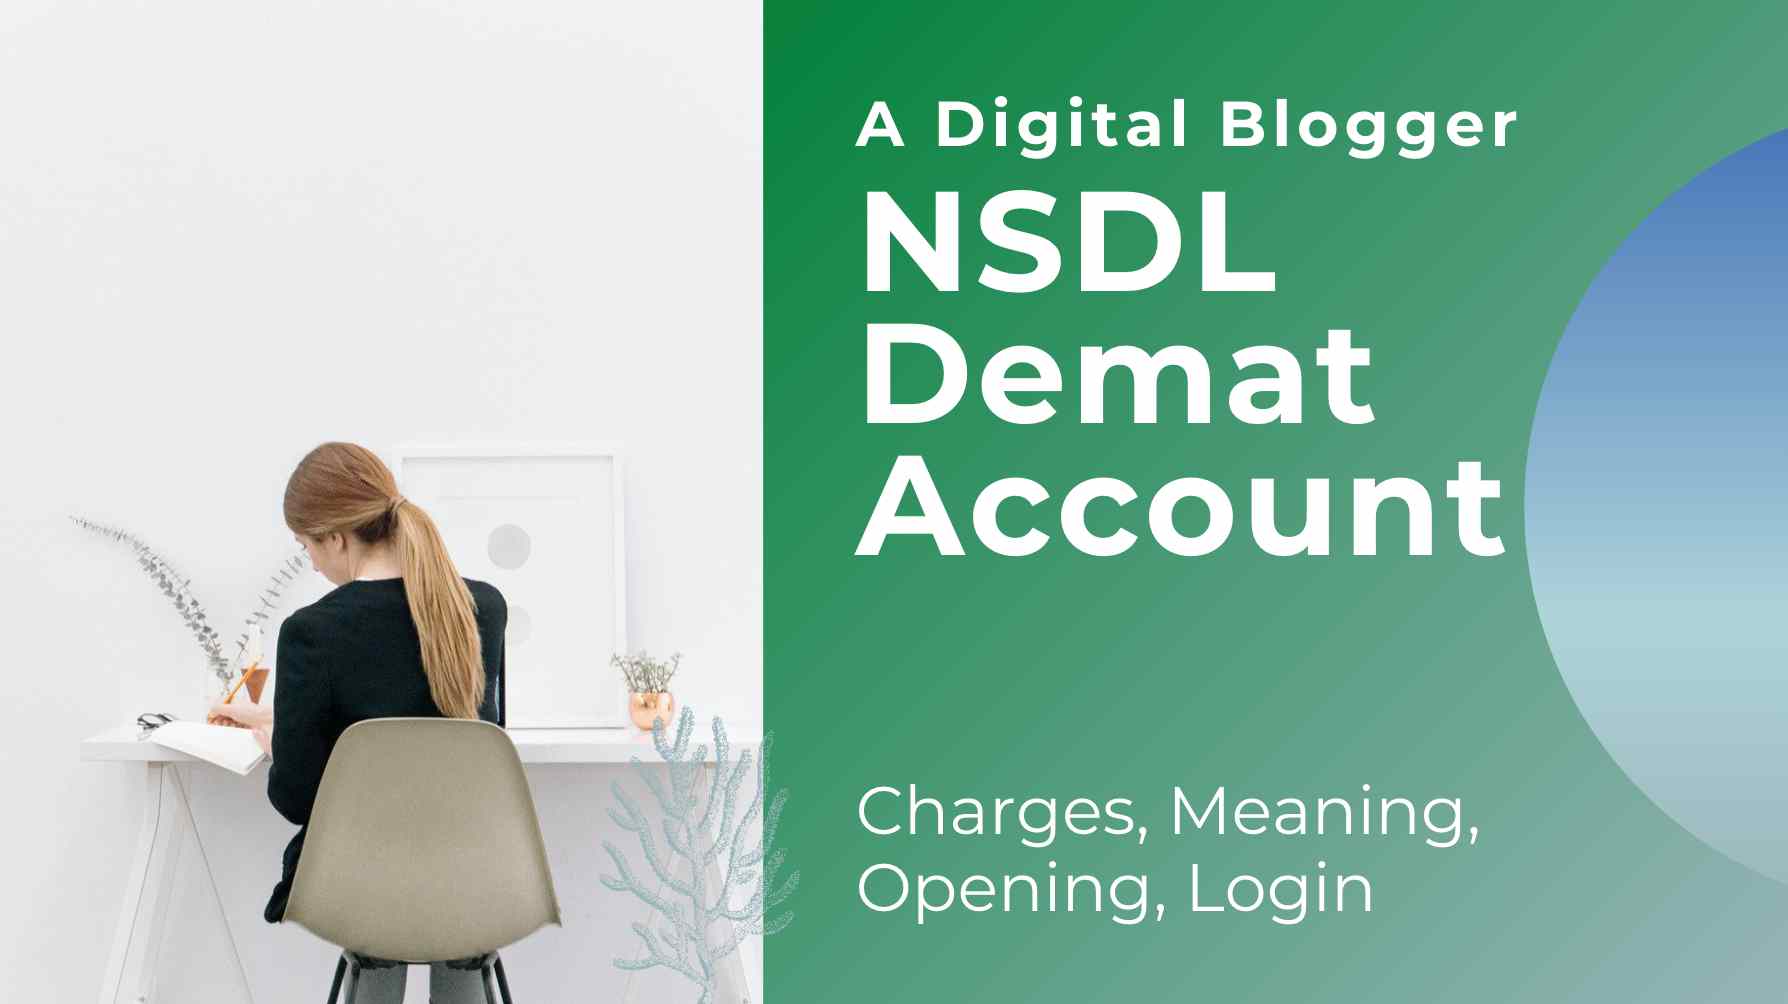 NSDL Demat Account | Meaning, Opening, Charges, Login